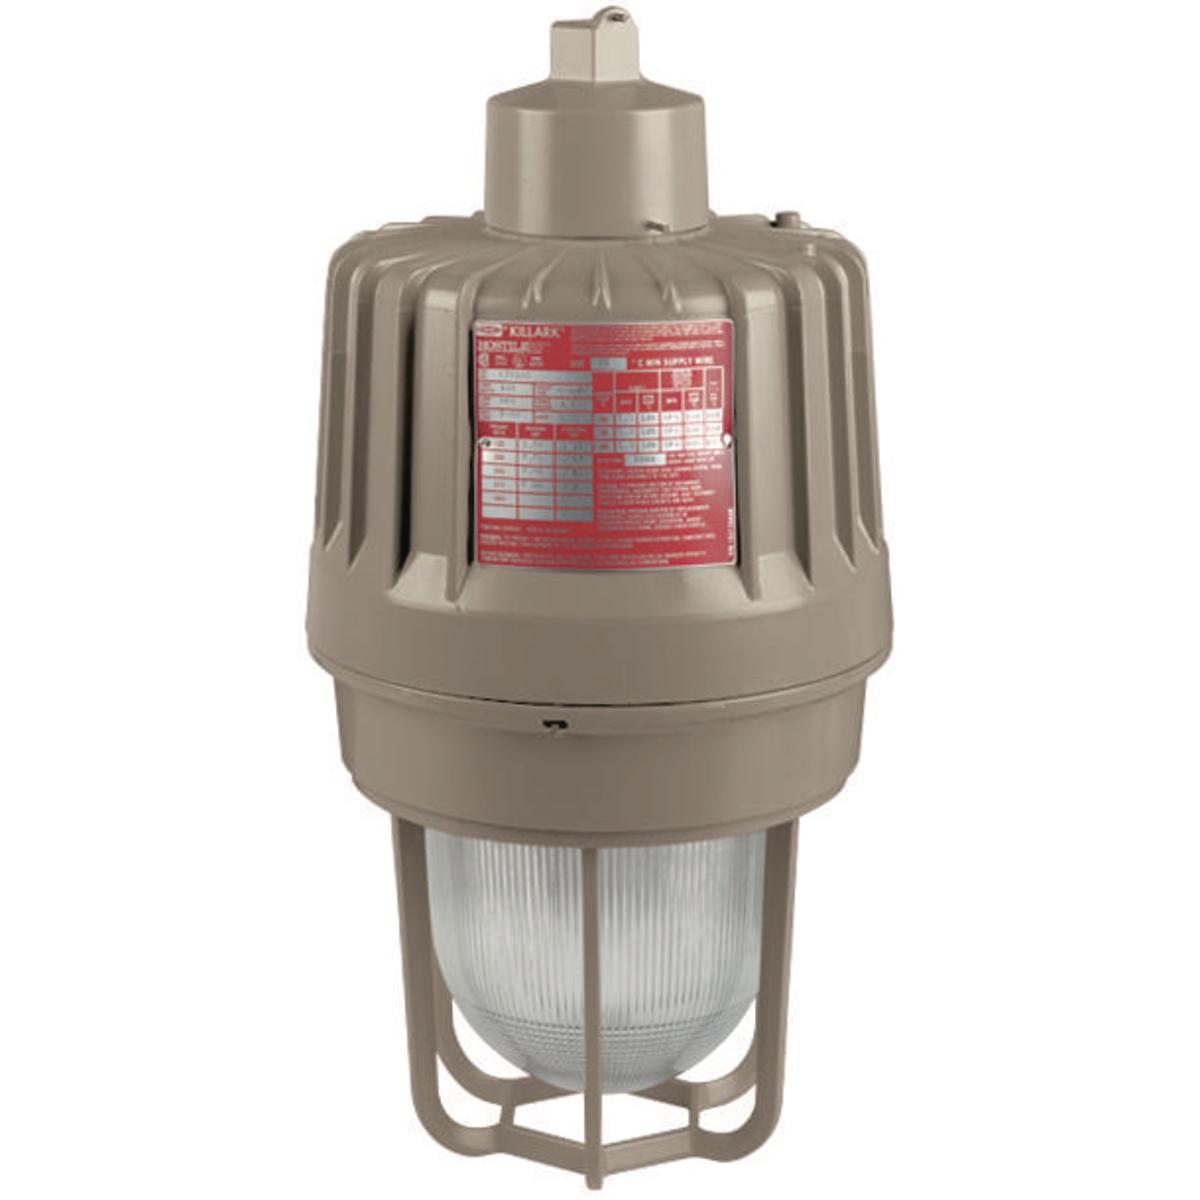 Hubbell EZS405A2G HID 400W 480V High Pressure Sodium 3/4" Pendant with Guard  ; Three light sources – High Pressure Sodium (50-400W), Metal Halide (70-400W) and Pulse Start Metal Halide (175-400W) ; Mounting choice –Pendant, ceiling, 25˚ stanchion or 90˚ wall mount, all wi